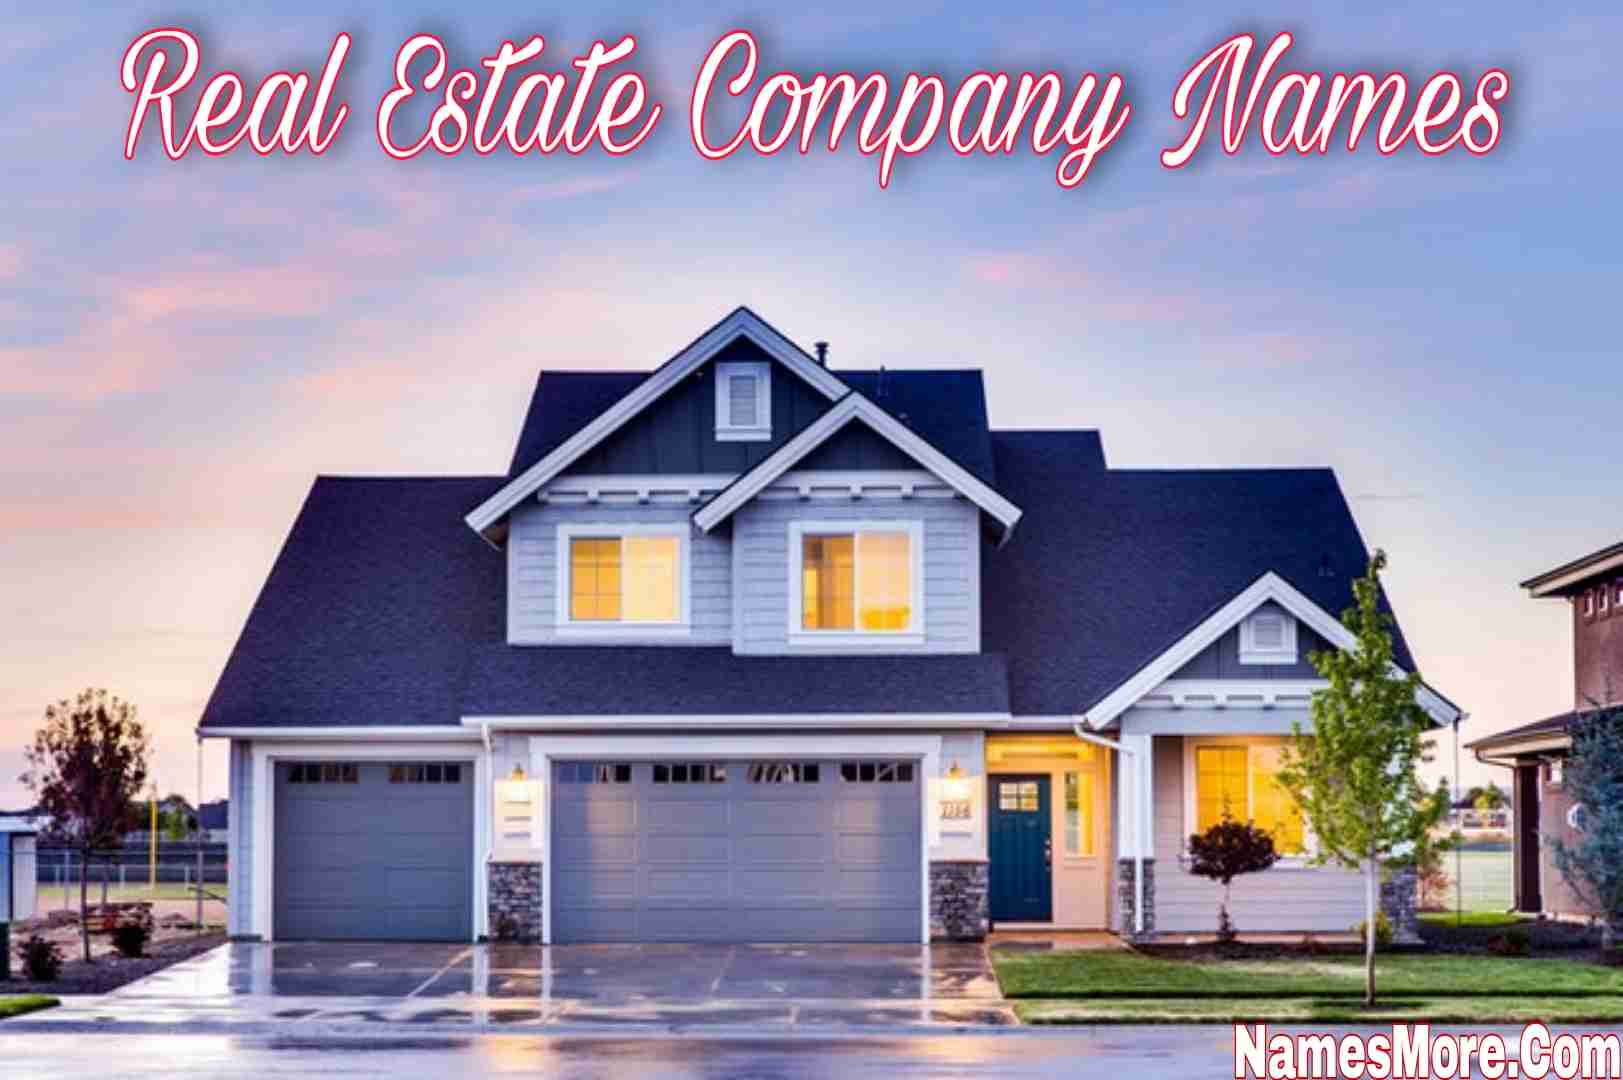 Featured Image for Real Estate Company Names | 950+ Real Estate Business Names